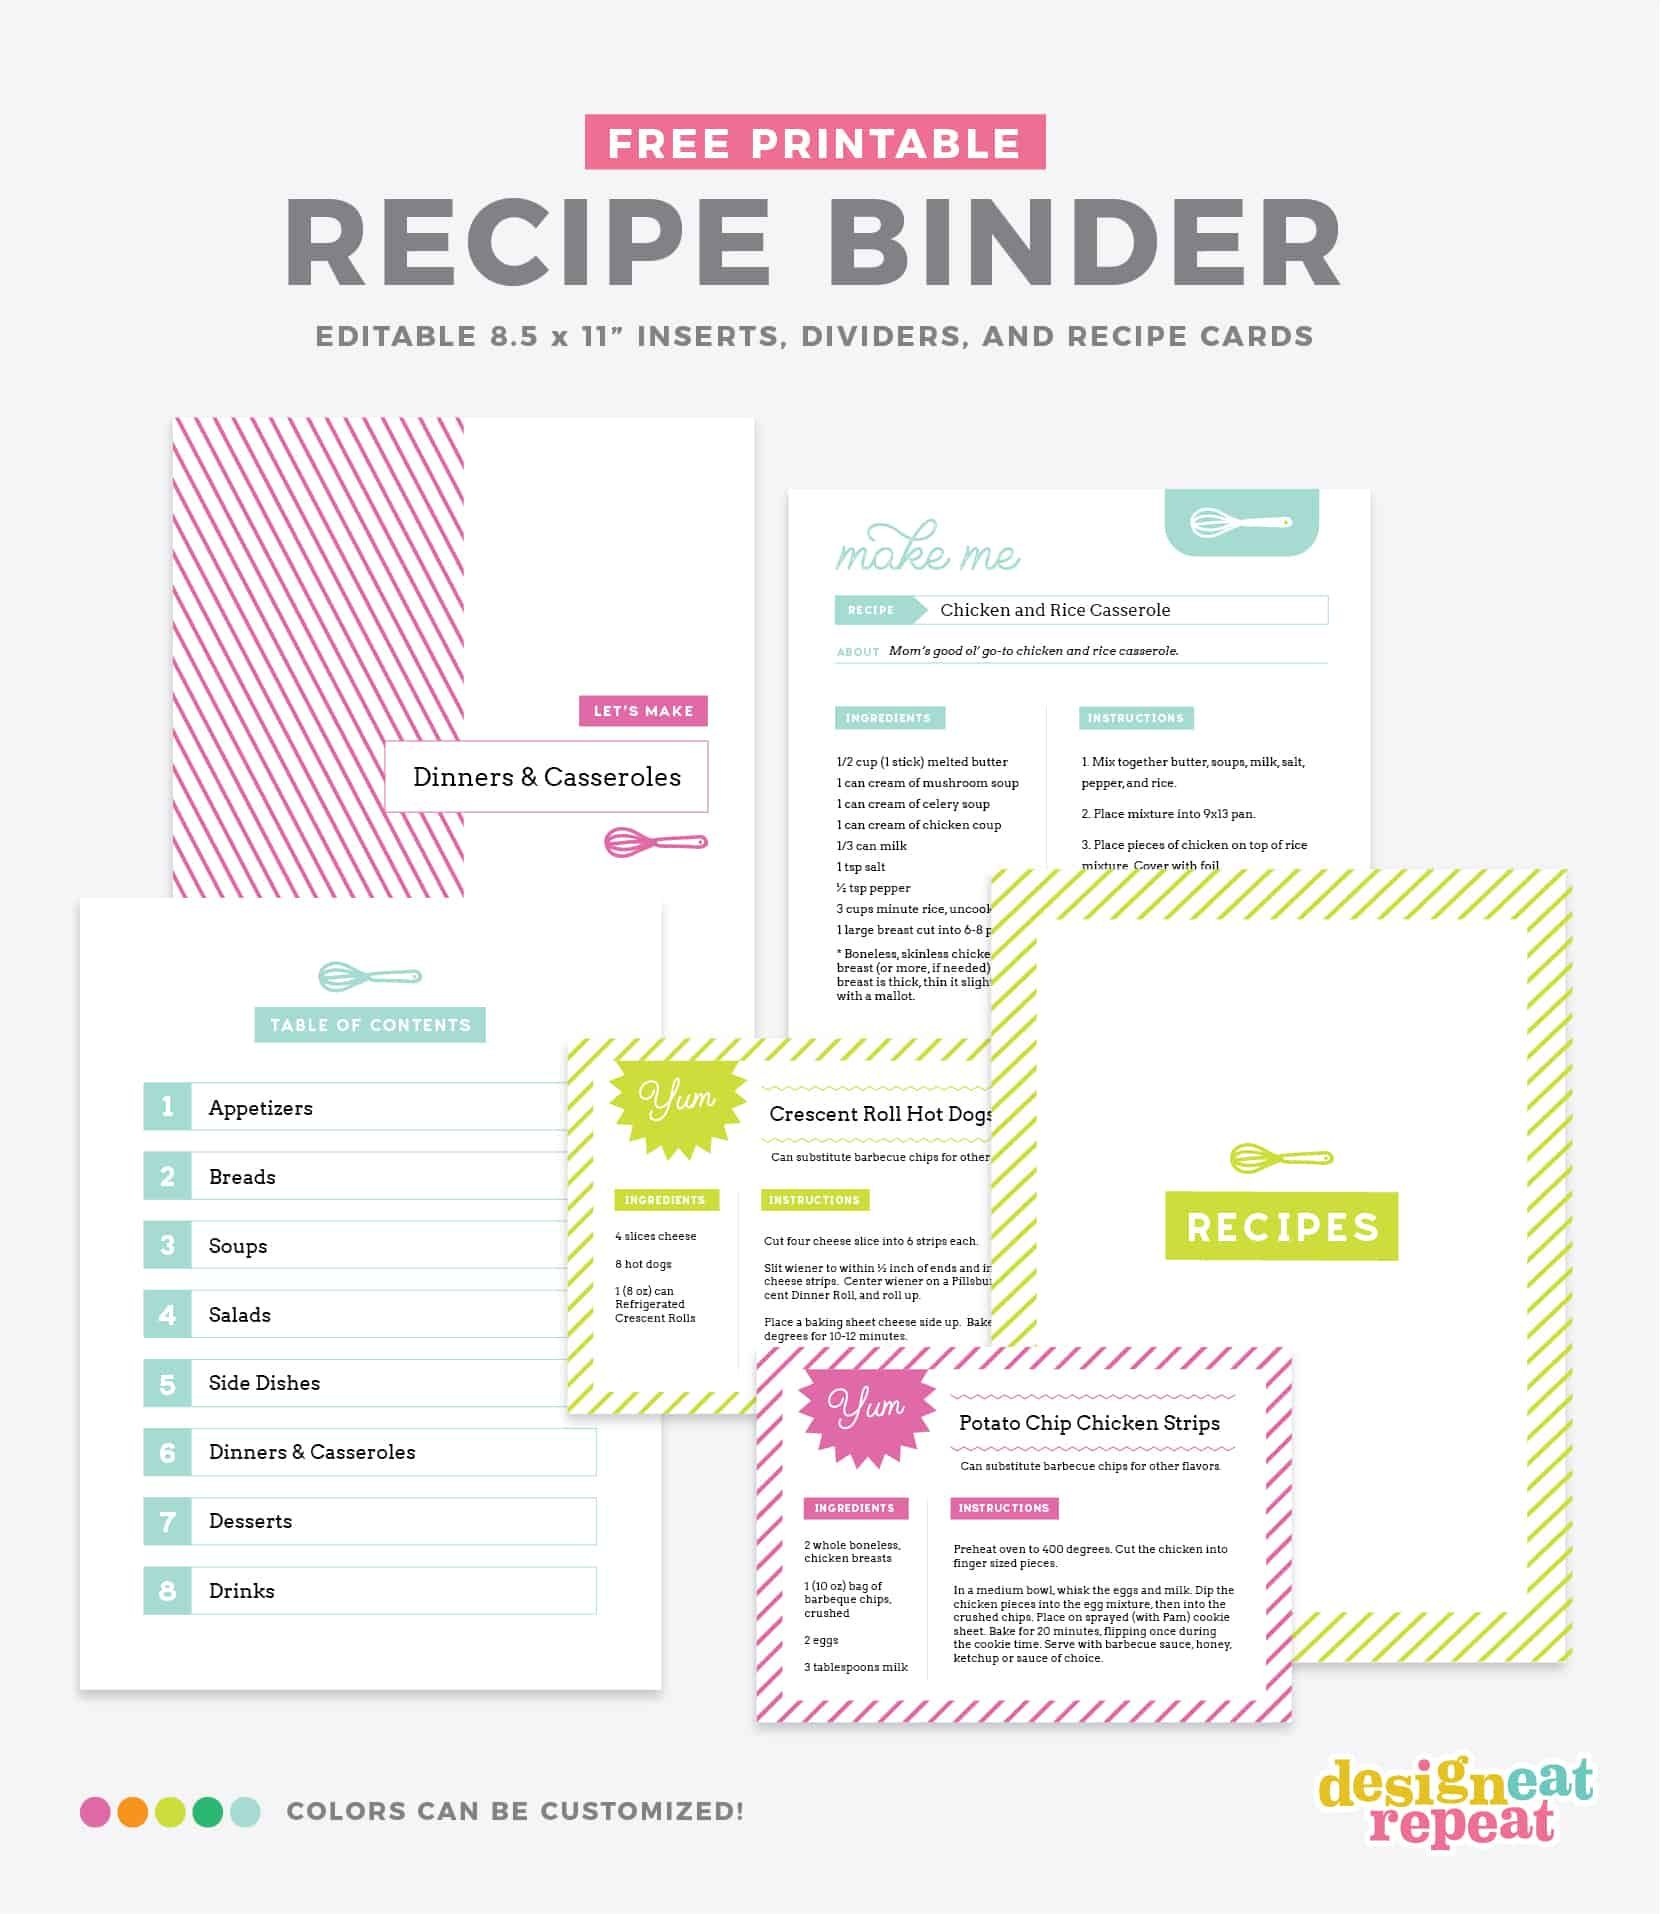 Organize Your Favorite Recipes Into A Diy Recipe Book With These Fun - Free Printable Recipe Binder Kit